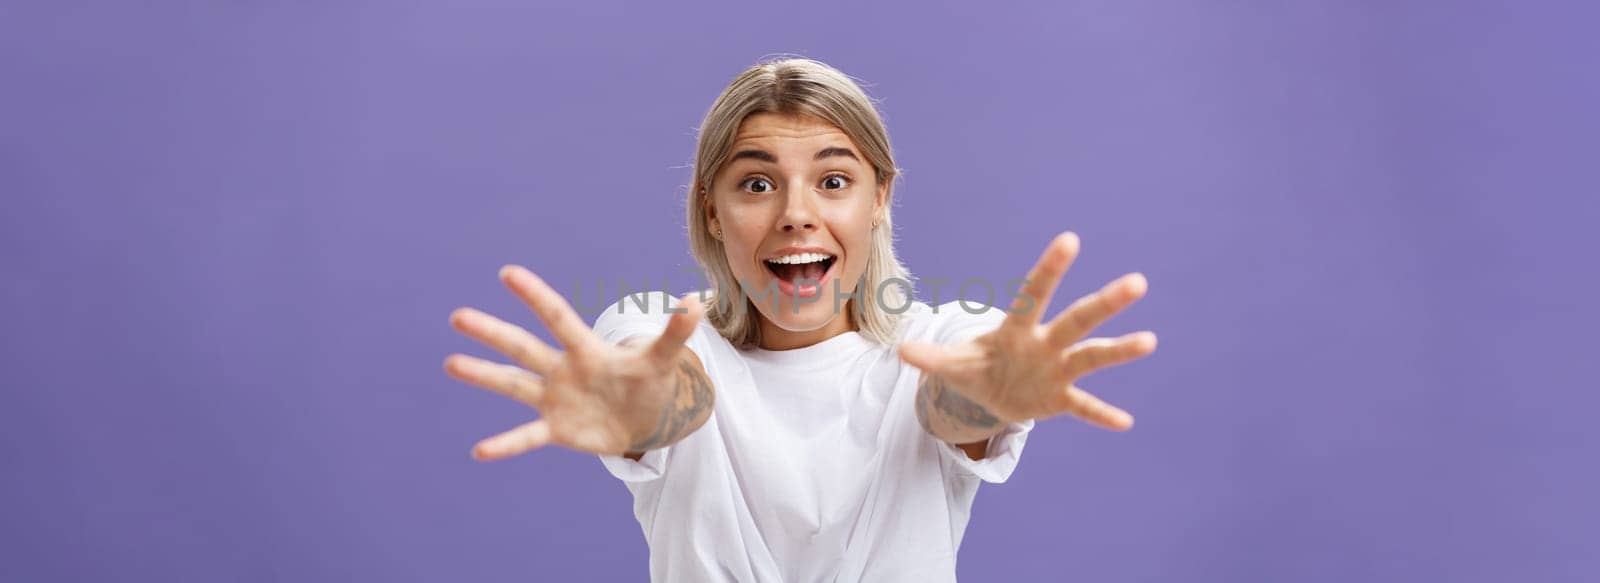 Lifestyle. Waist-up shot of amused and excited attractive stylish young woman in white t-shirt pulling hands at camera with desire smiling thrilled and happy wanting hug or take something over purple background.